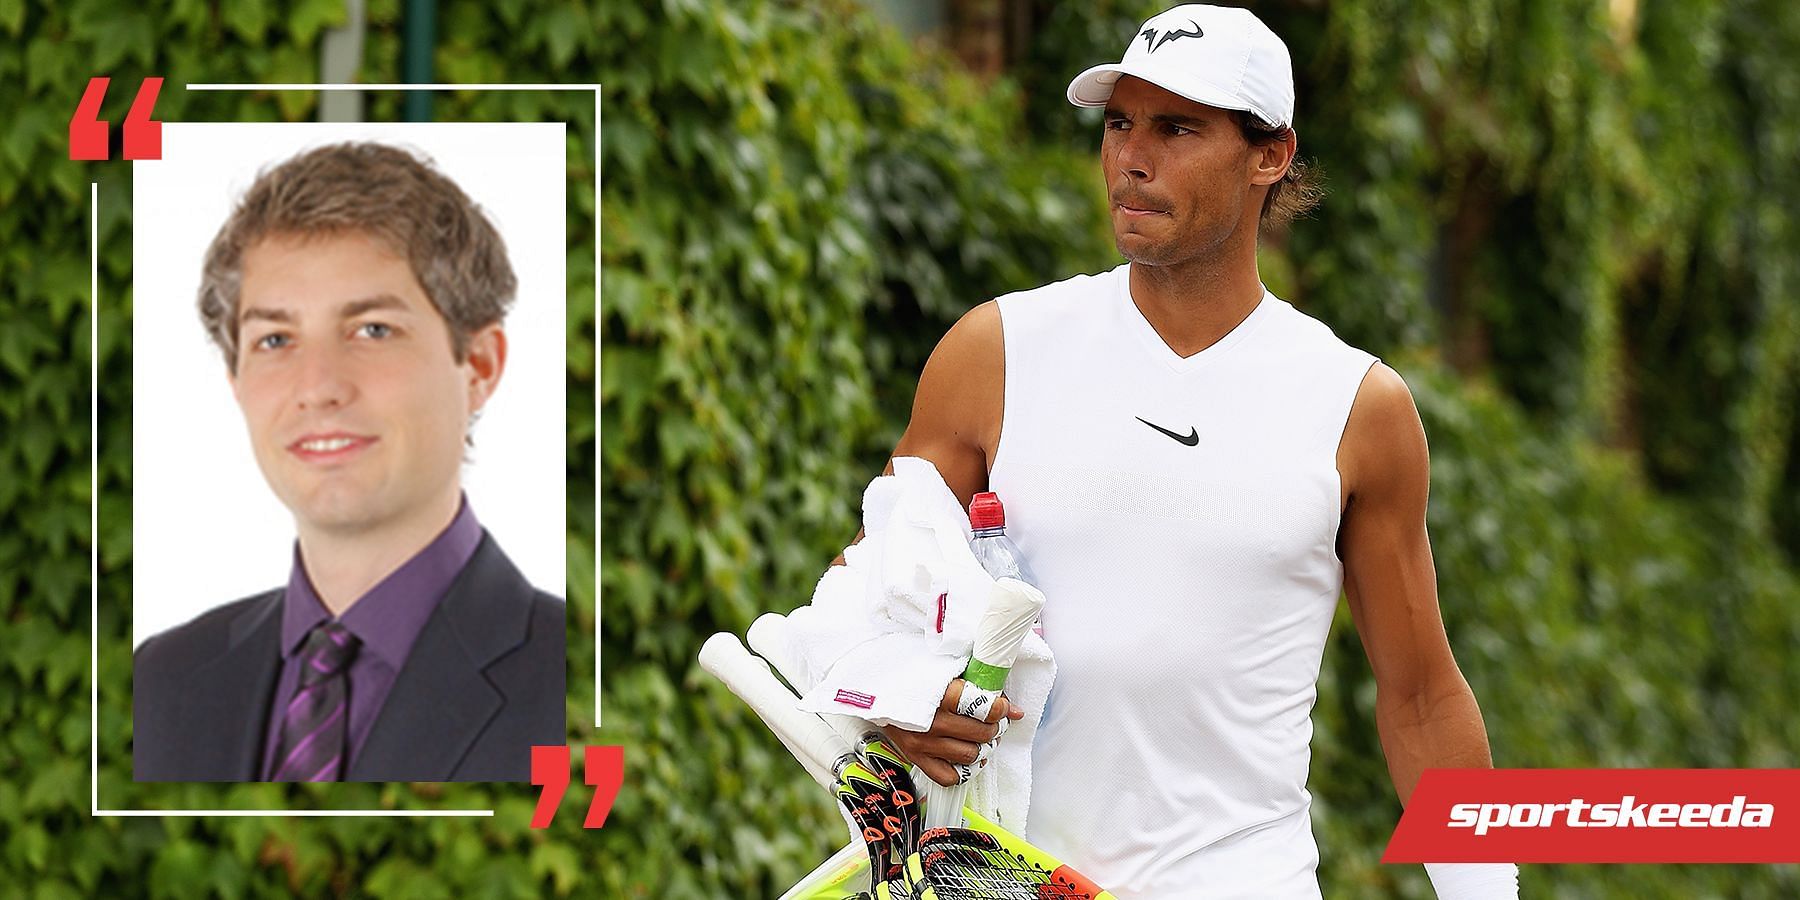 Rafael Nadal is getting ready for the 2022 Wimbledon Championships